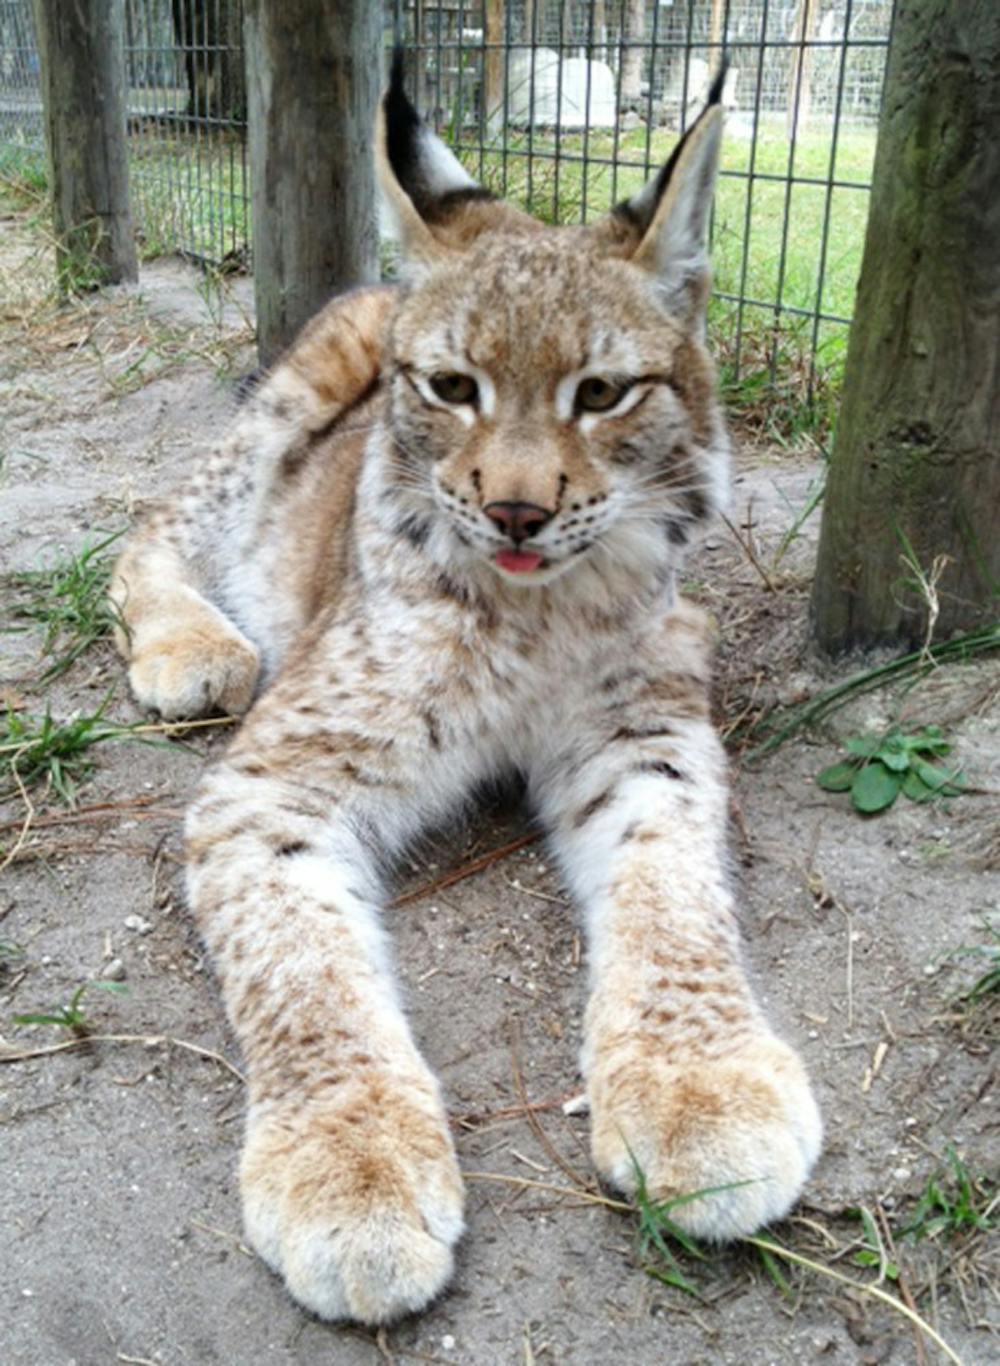 <p>The workers at Carson Springs Wildlife Conservation Foundation recently discovered that Zena, an Eurasian lynx, is actually male.</p>
<p> </p>